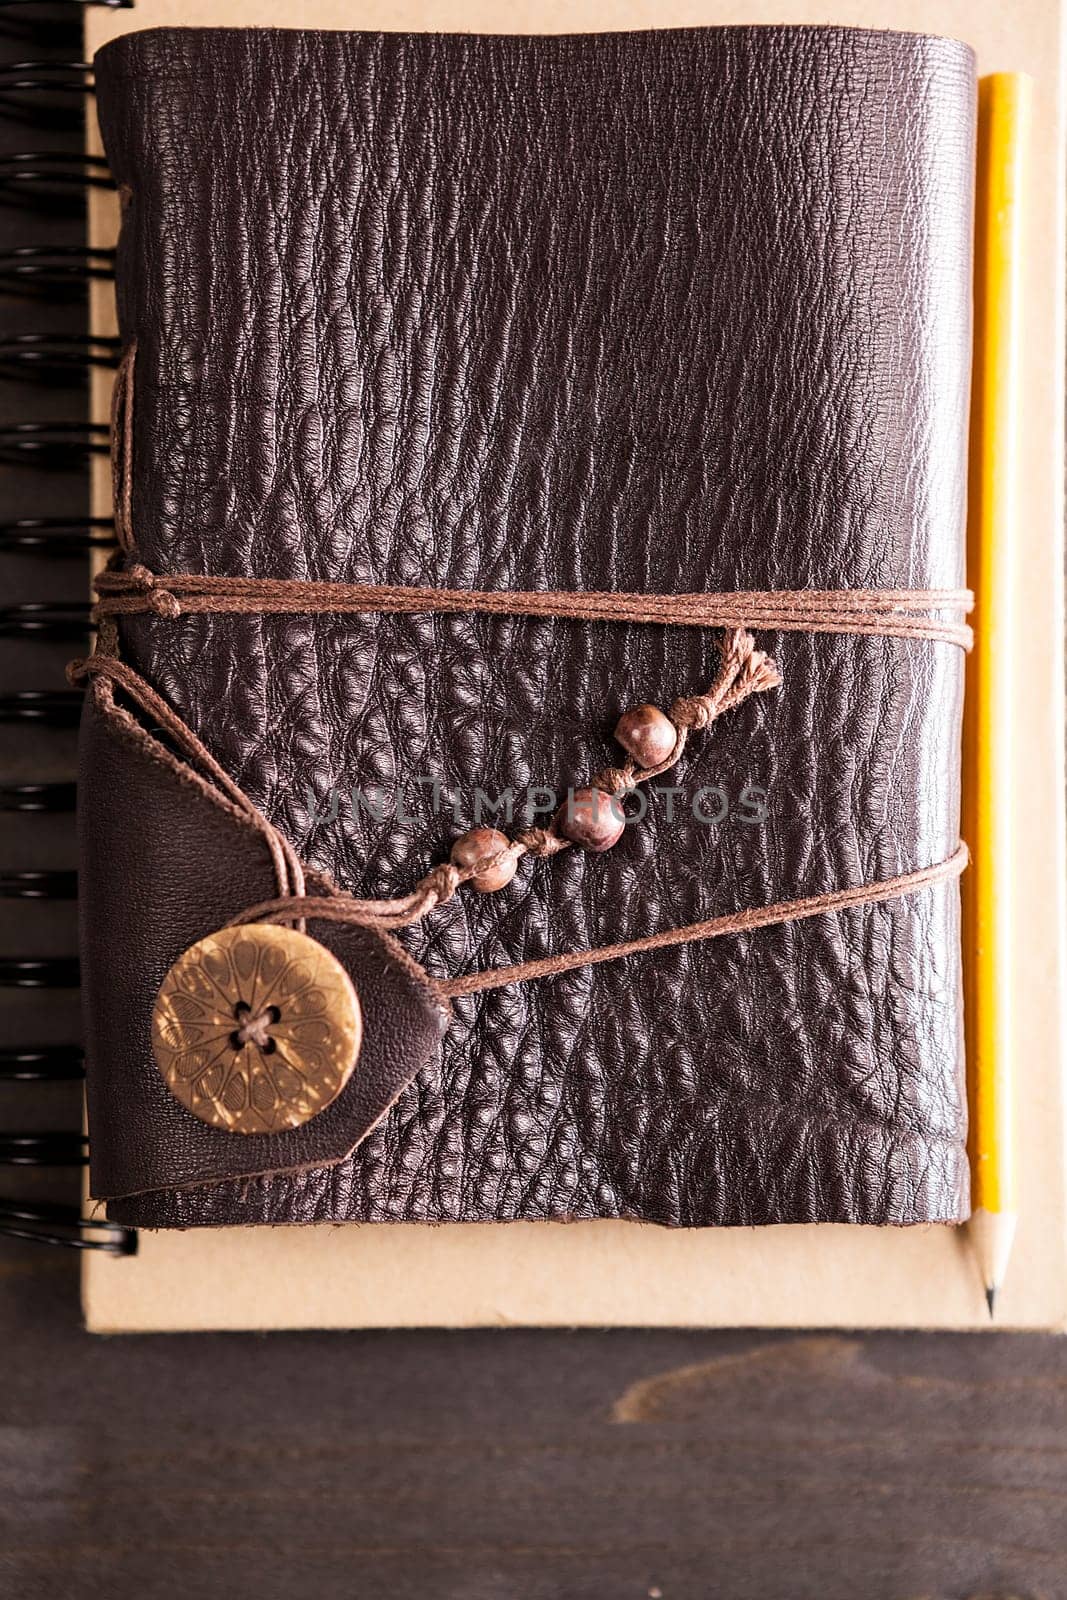 Pencil on retro notebook with leather cover on wooden backgorund